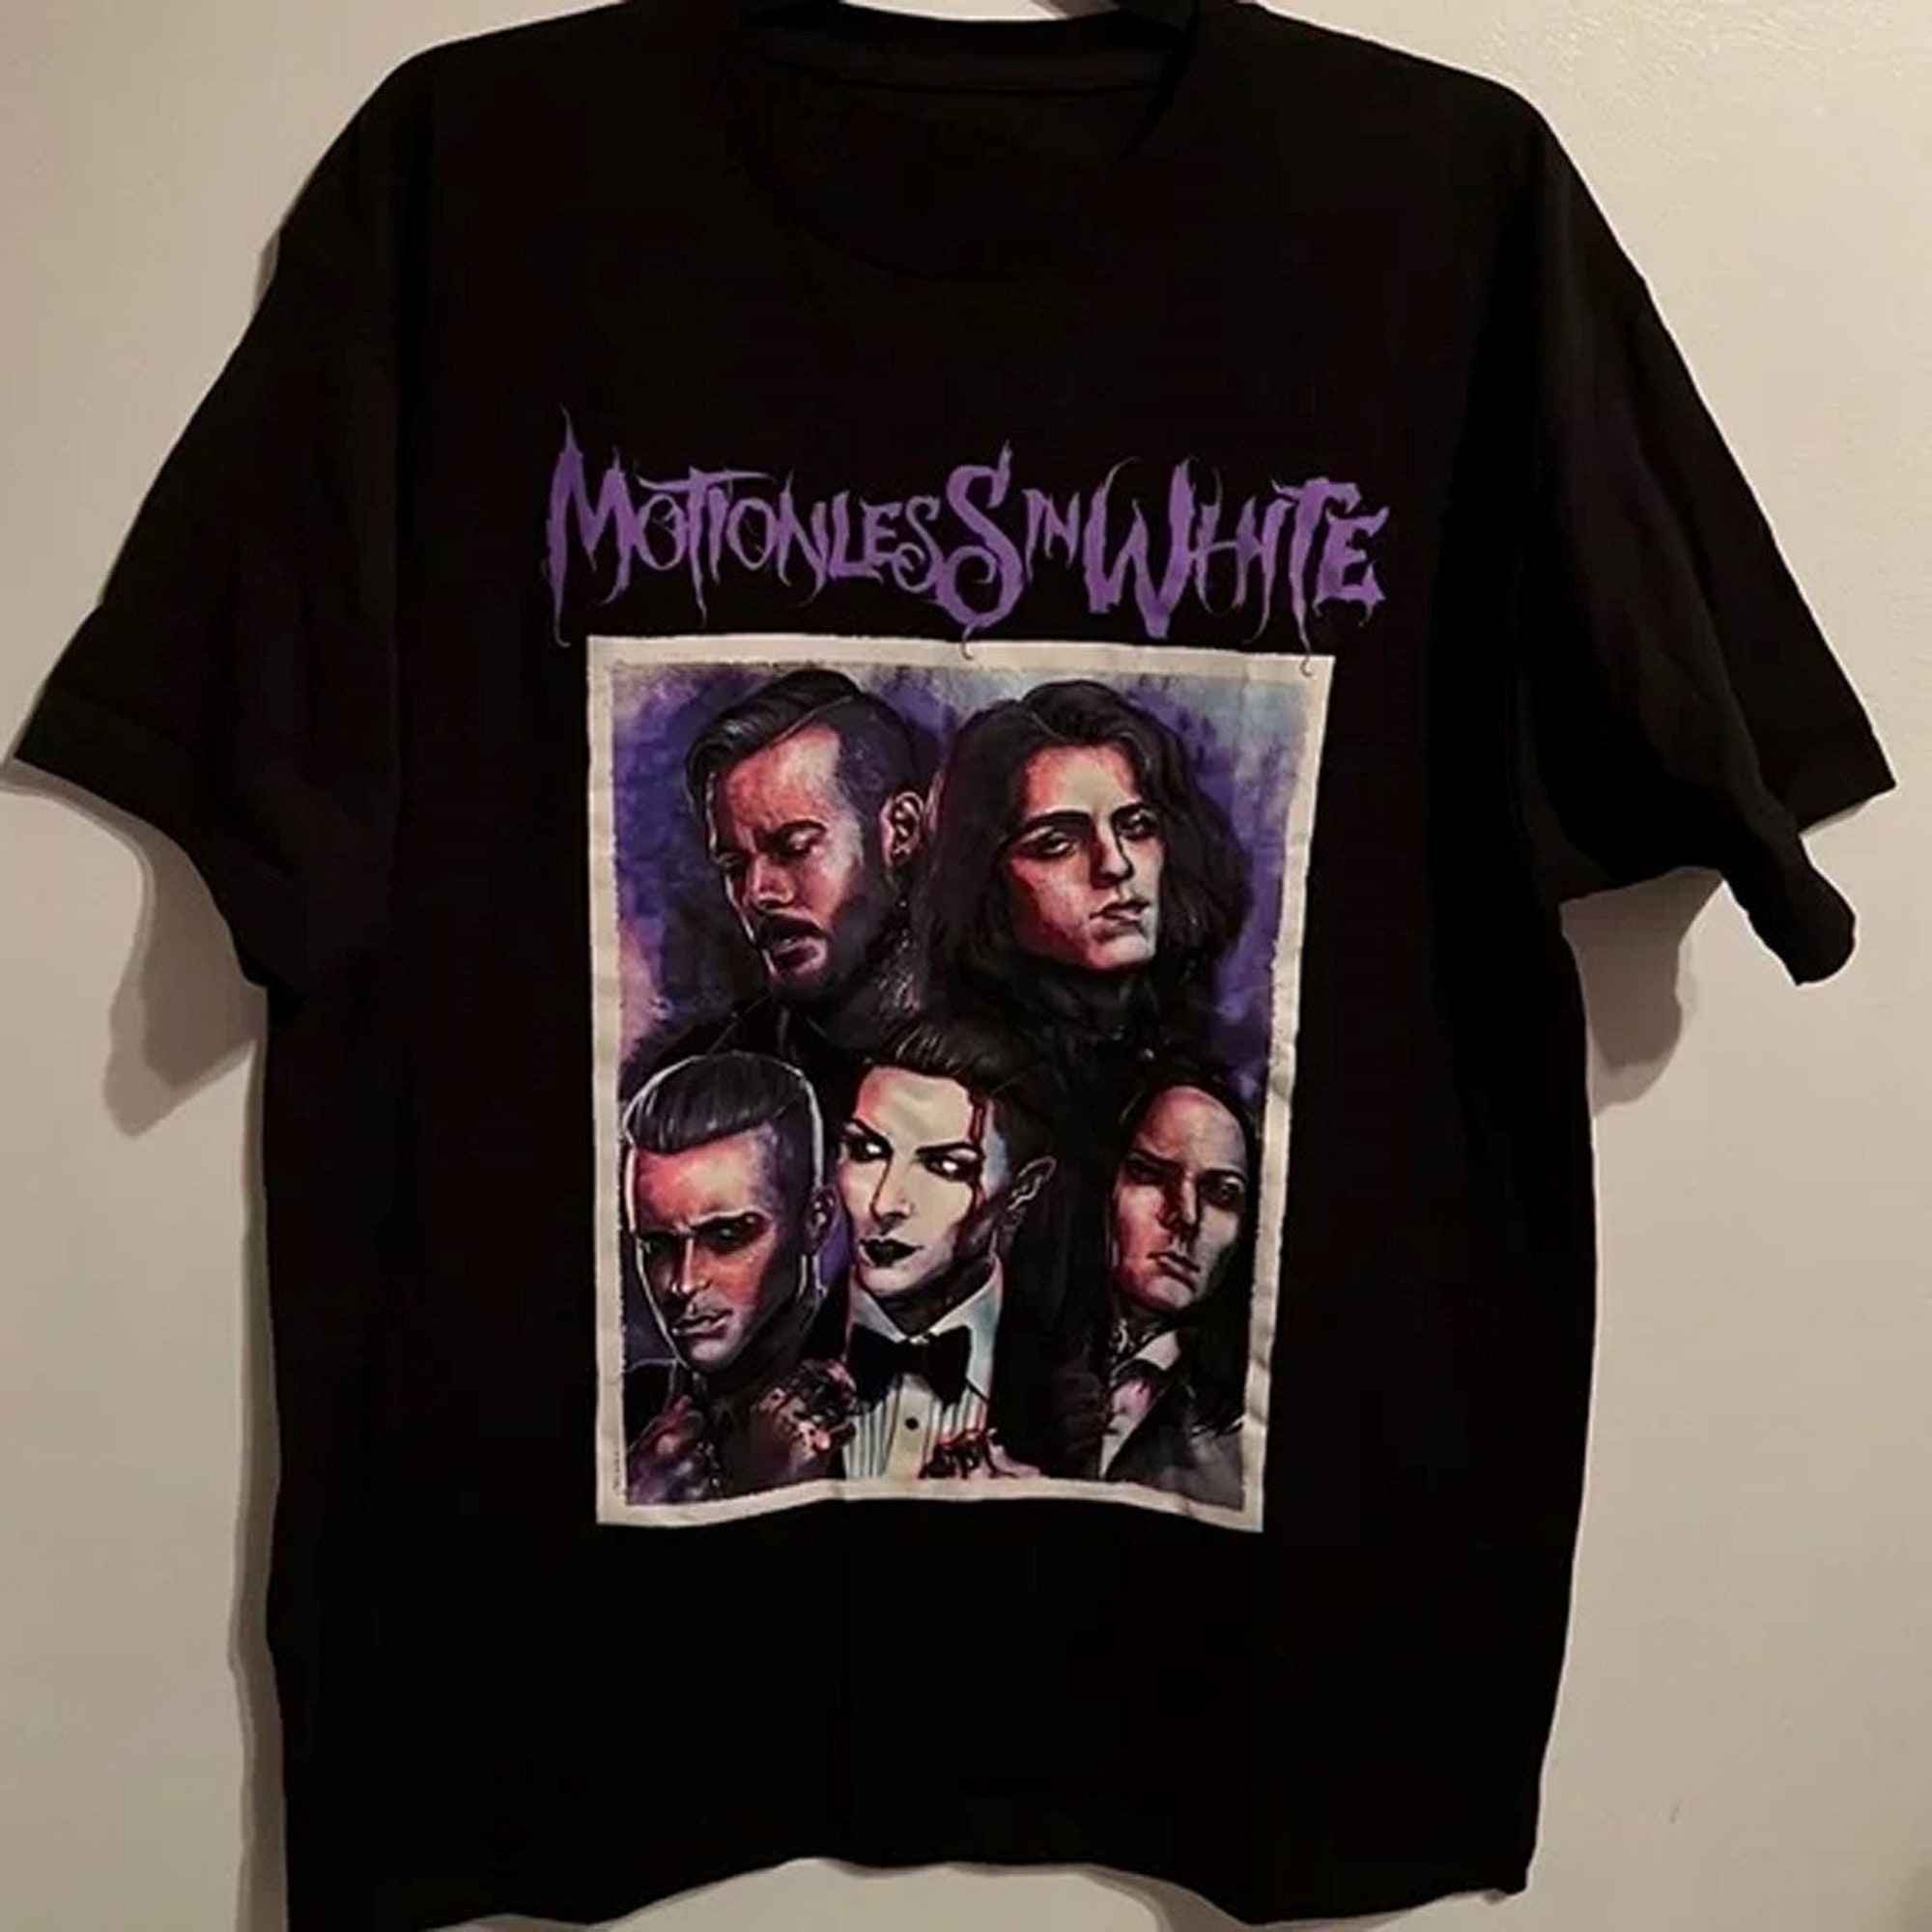 Vintage 90s Motionless In White Band Concert Portrait Photo Painting T-Shirt, Motionless In White Shirt